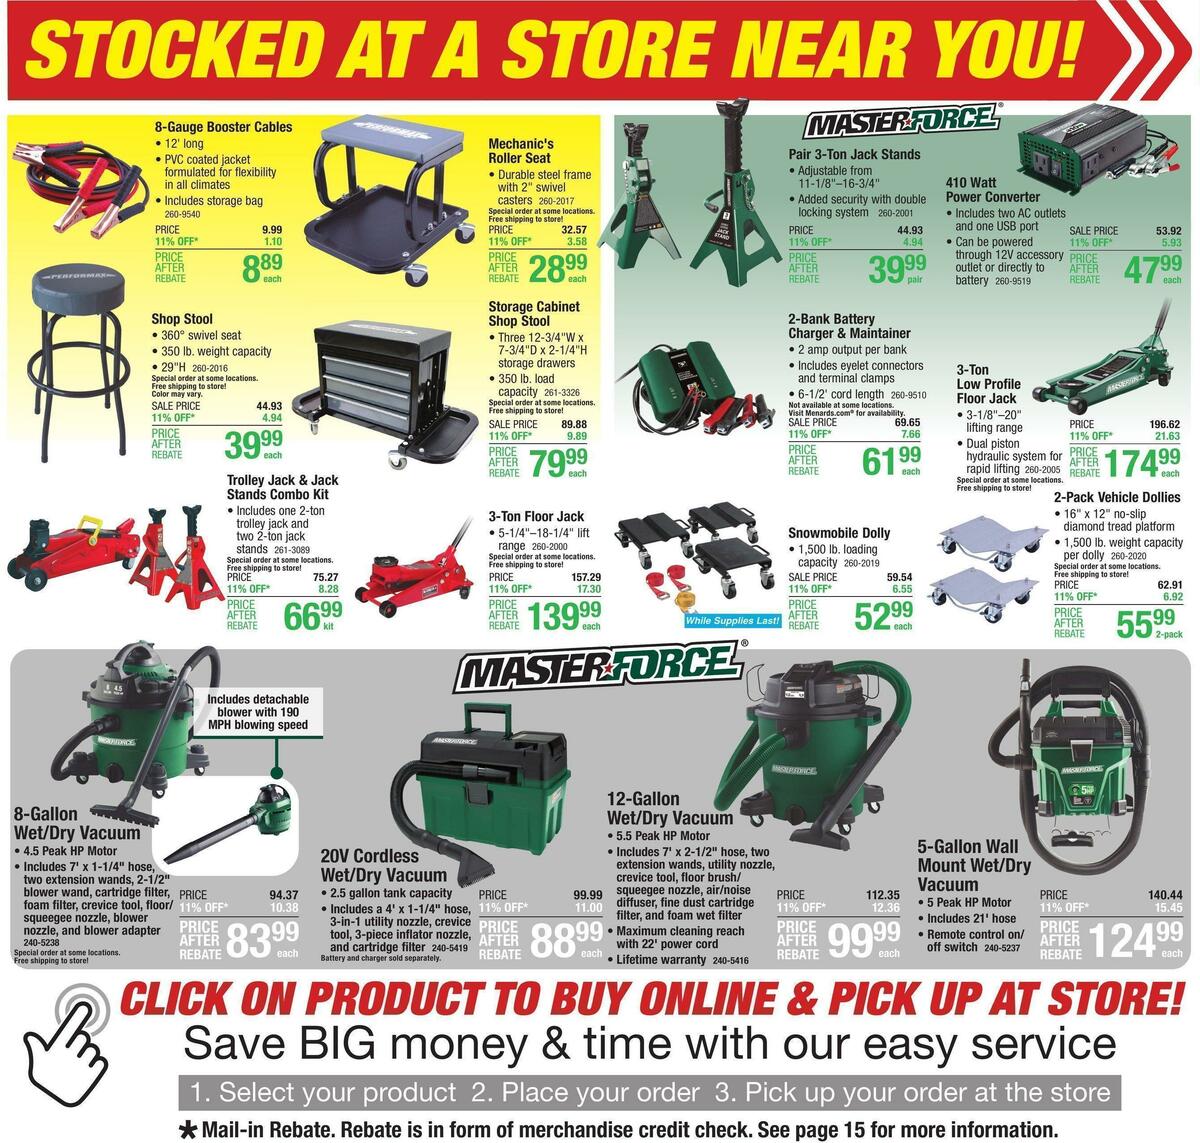 Menards Weekly Ad from February 19